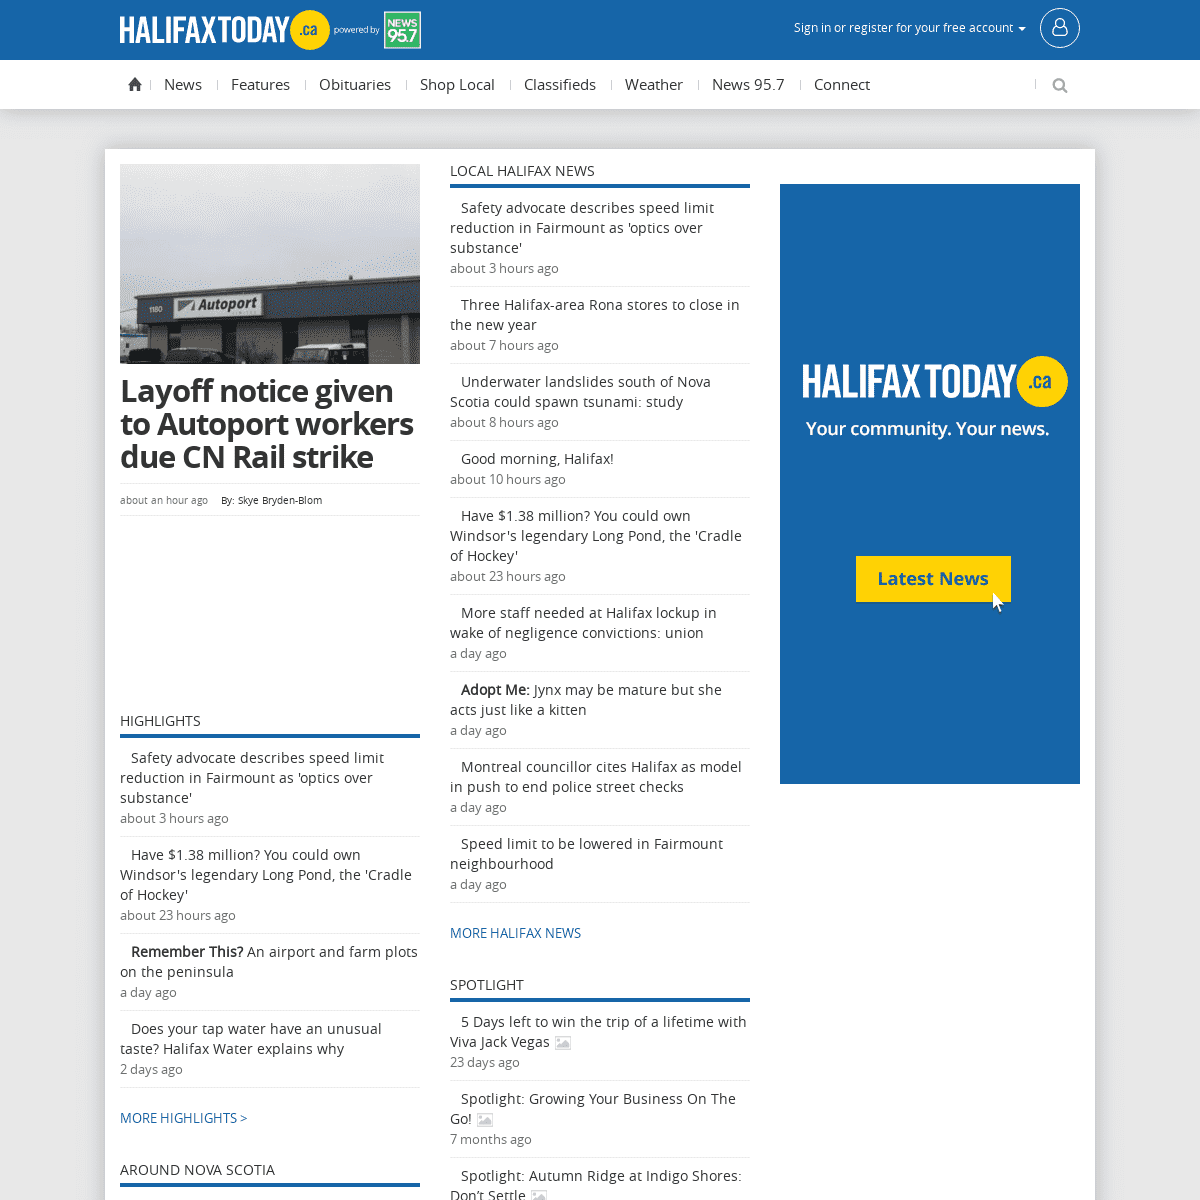 A complete backup of halifaxtoday.ca